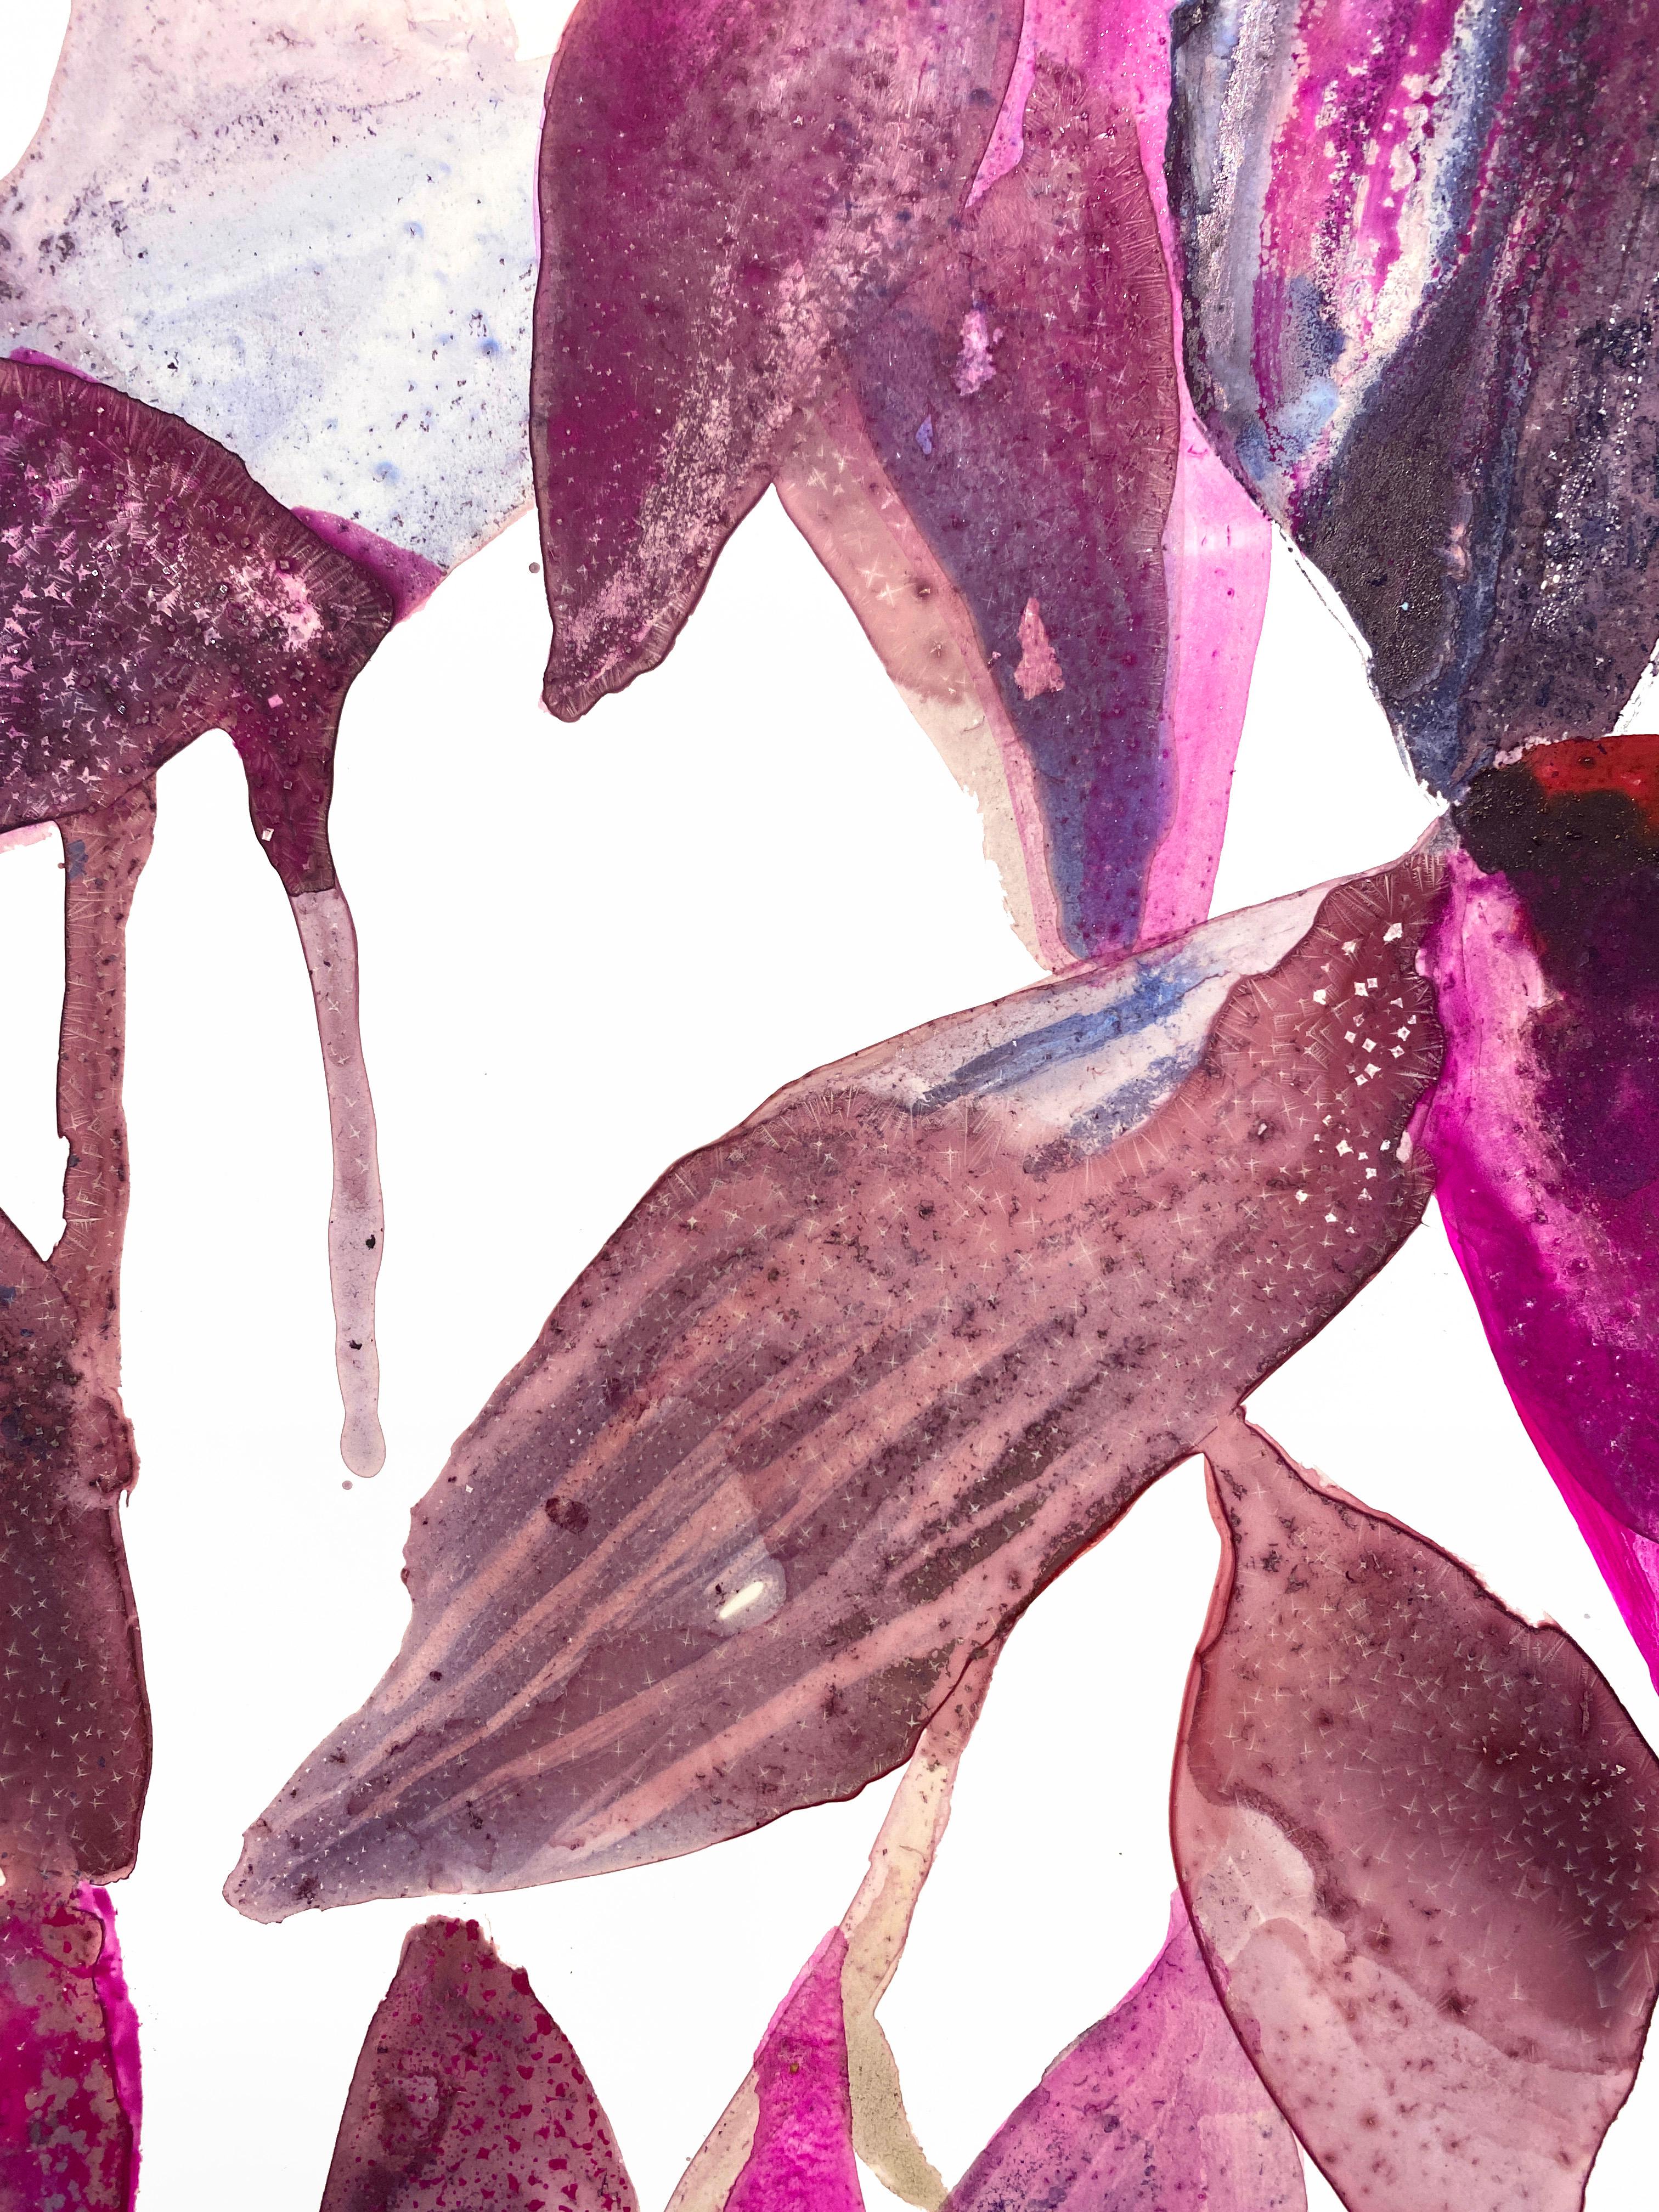 Watercolor and ink is applied in multiple layers creating plays on color from deep magenta to burgundy and soft notes of various shades of purple creating a painterly approach to representational painting of plant life. Her representation of